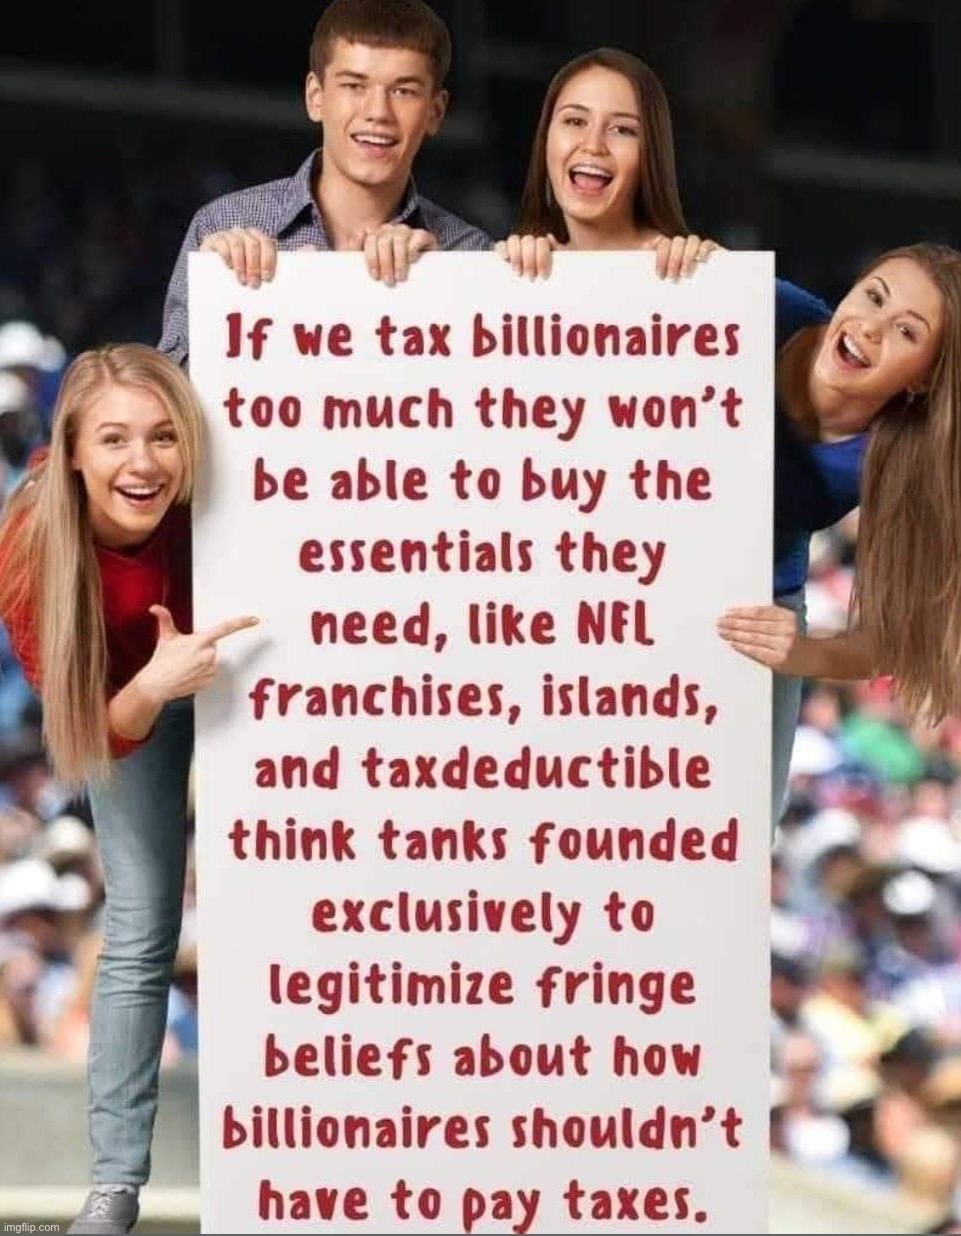 If we tax billionaires too much | image tagged in if we tax billionaires too much,billionaire,taxes,income inequality,inequality,cheaters | made w/ Imgflip meme maker